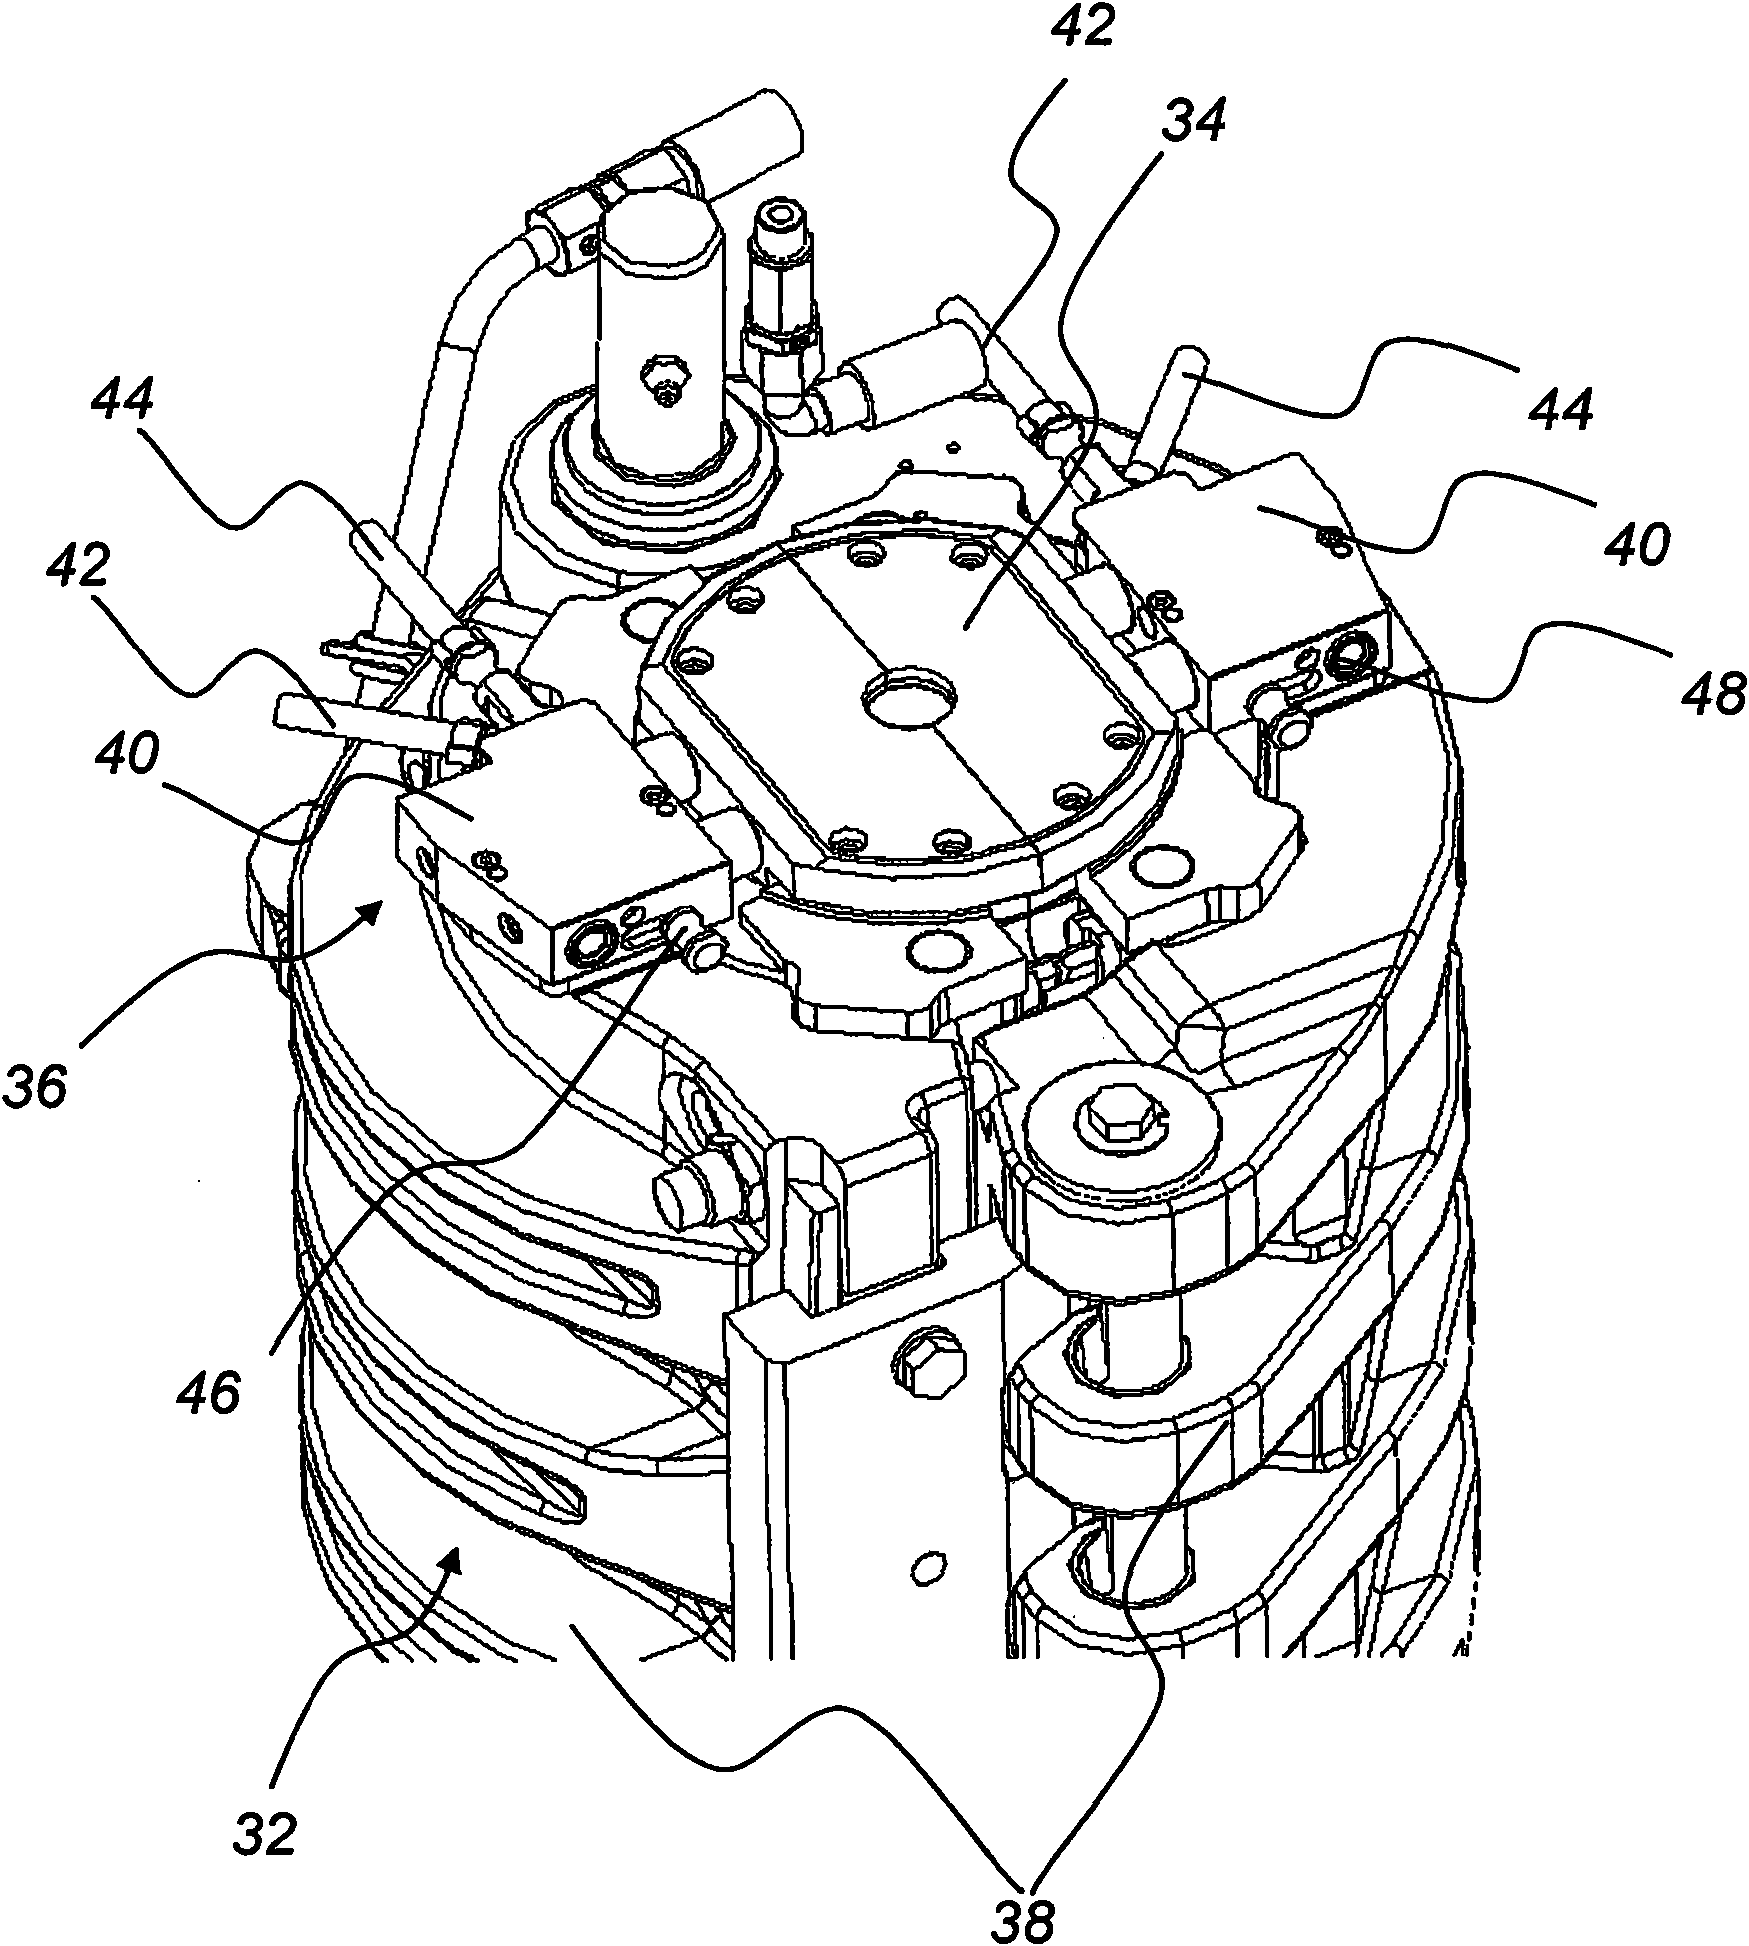 Device and method for blow moulding plastic containers